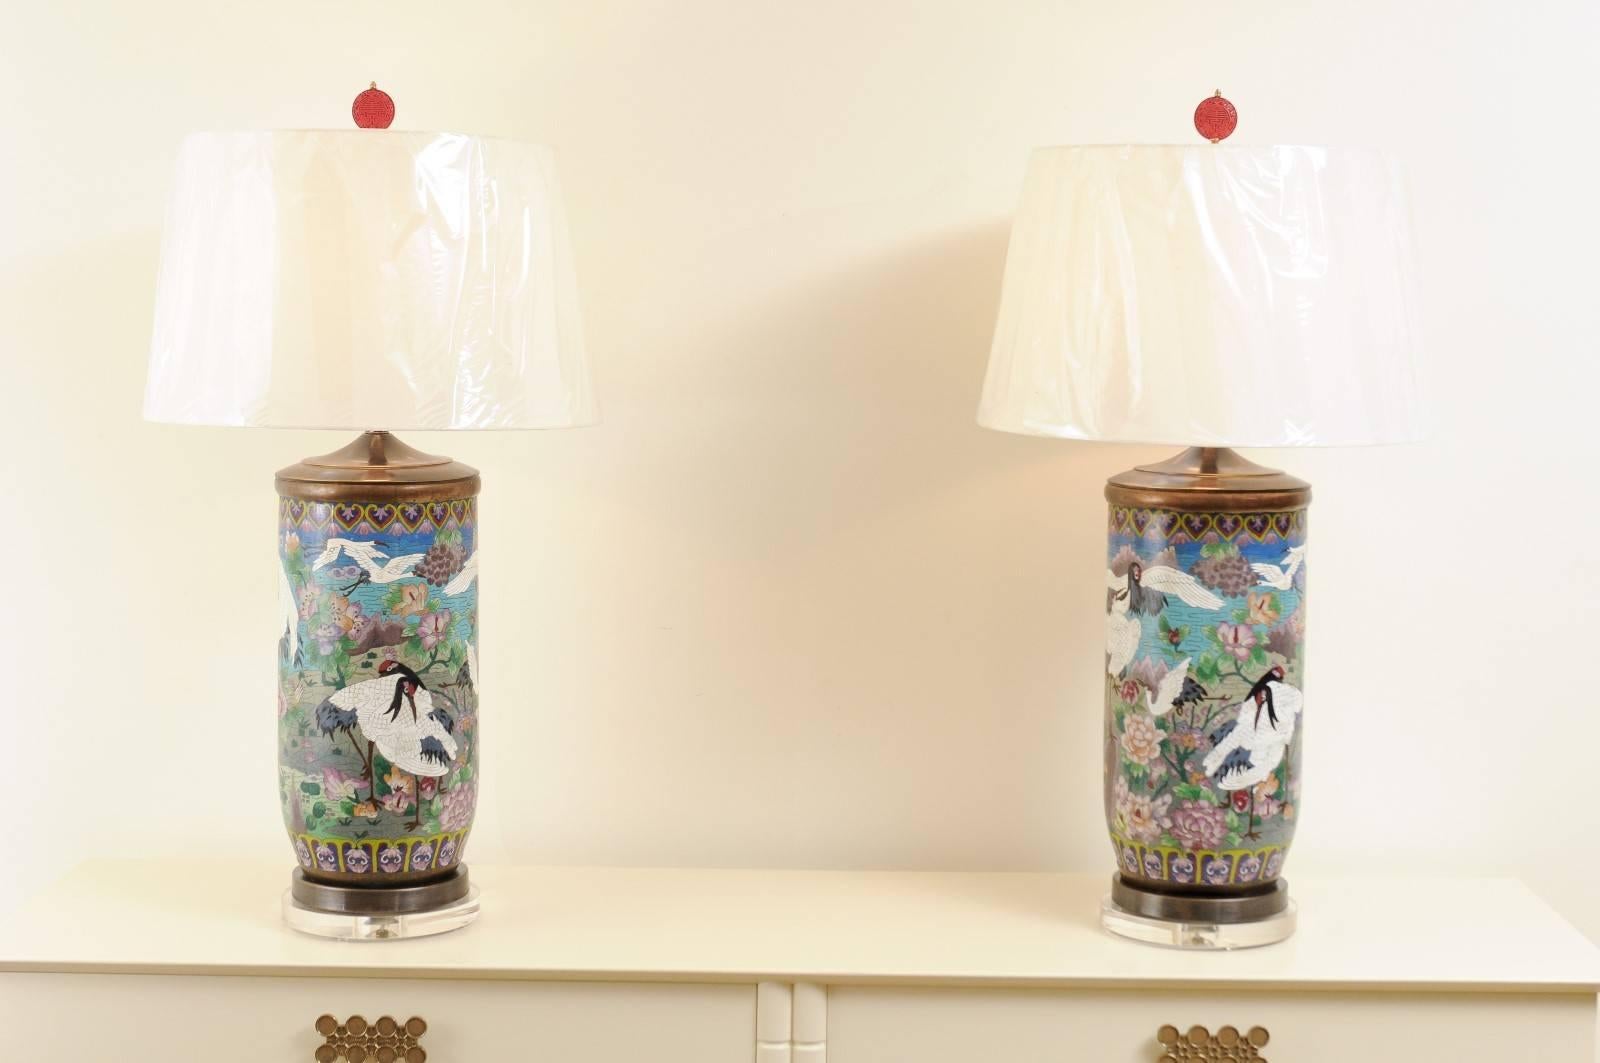 These magnificent lamps are shipped as photographed and described in the narrative. They are custom built using materials of the highest quality and are shipped complete with the new shades, harps and finials shown in the photos.

A majestic pair of